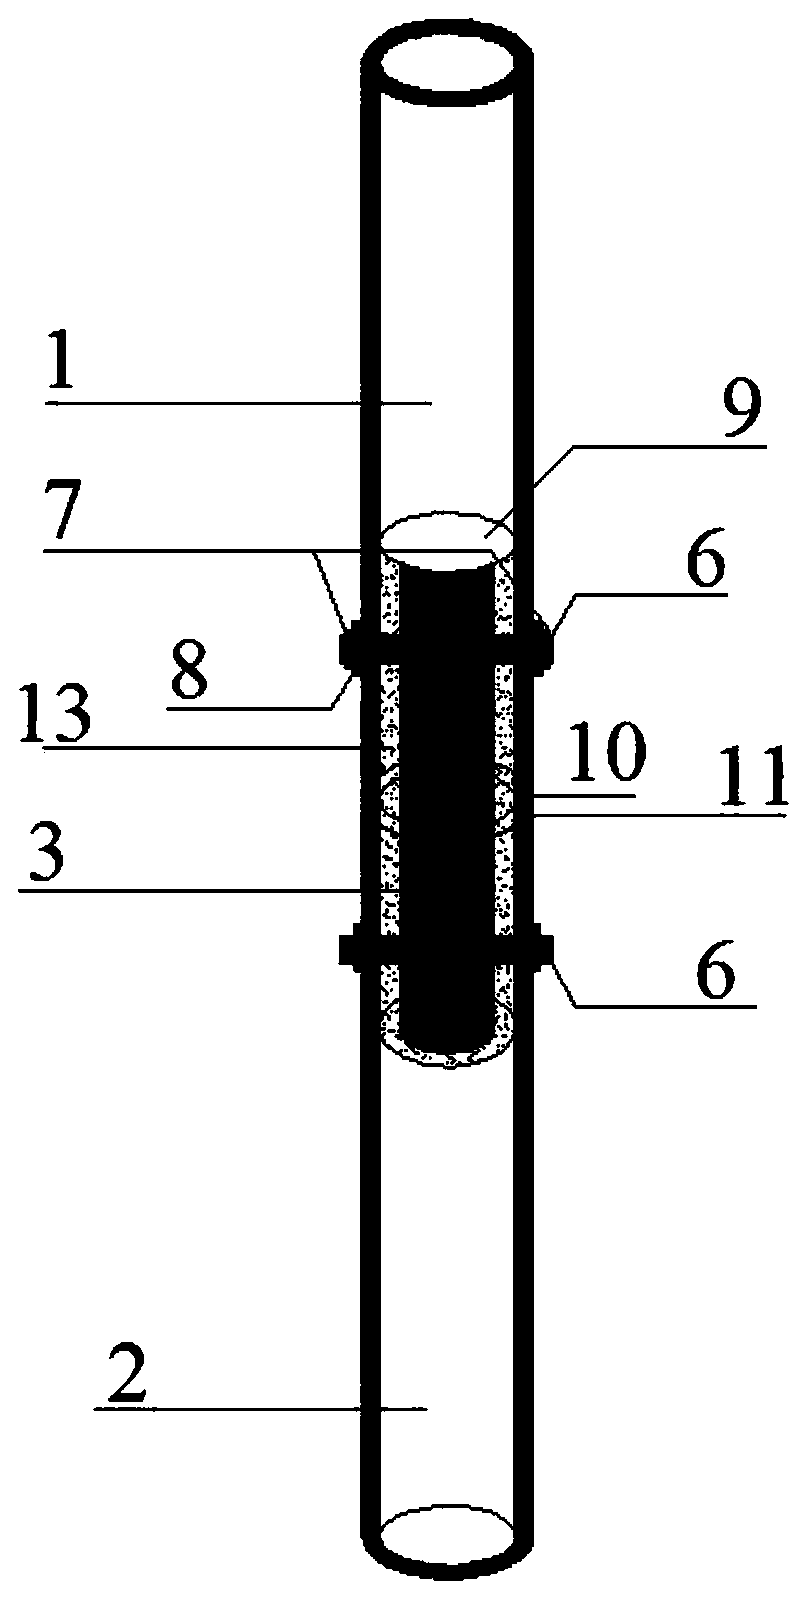 Plug pin type connection structure for prefabricated hollow uplift piles